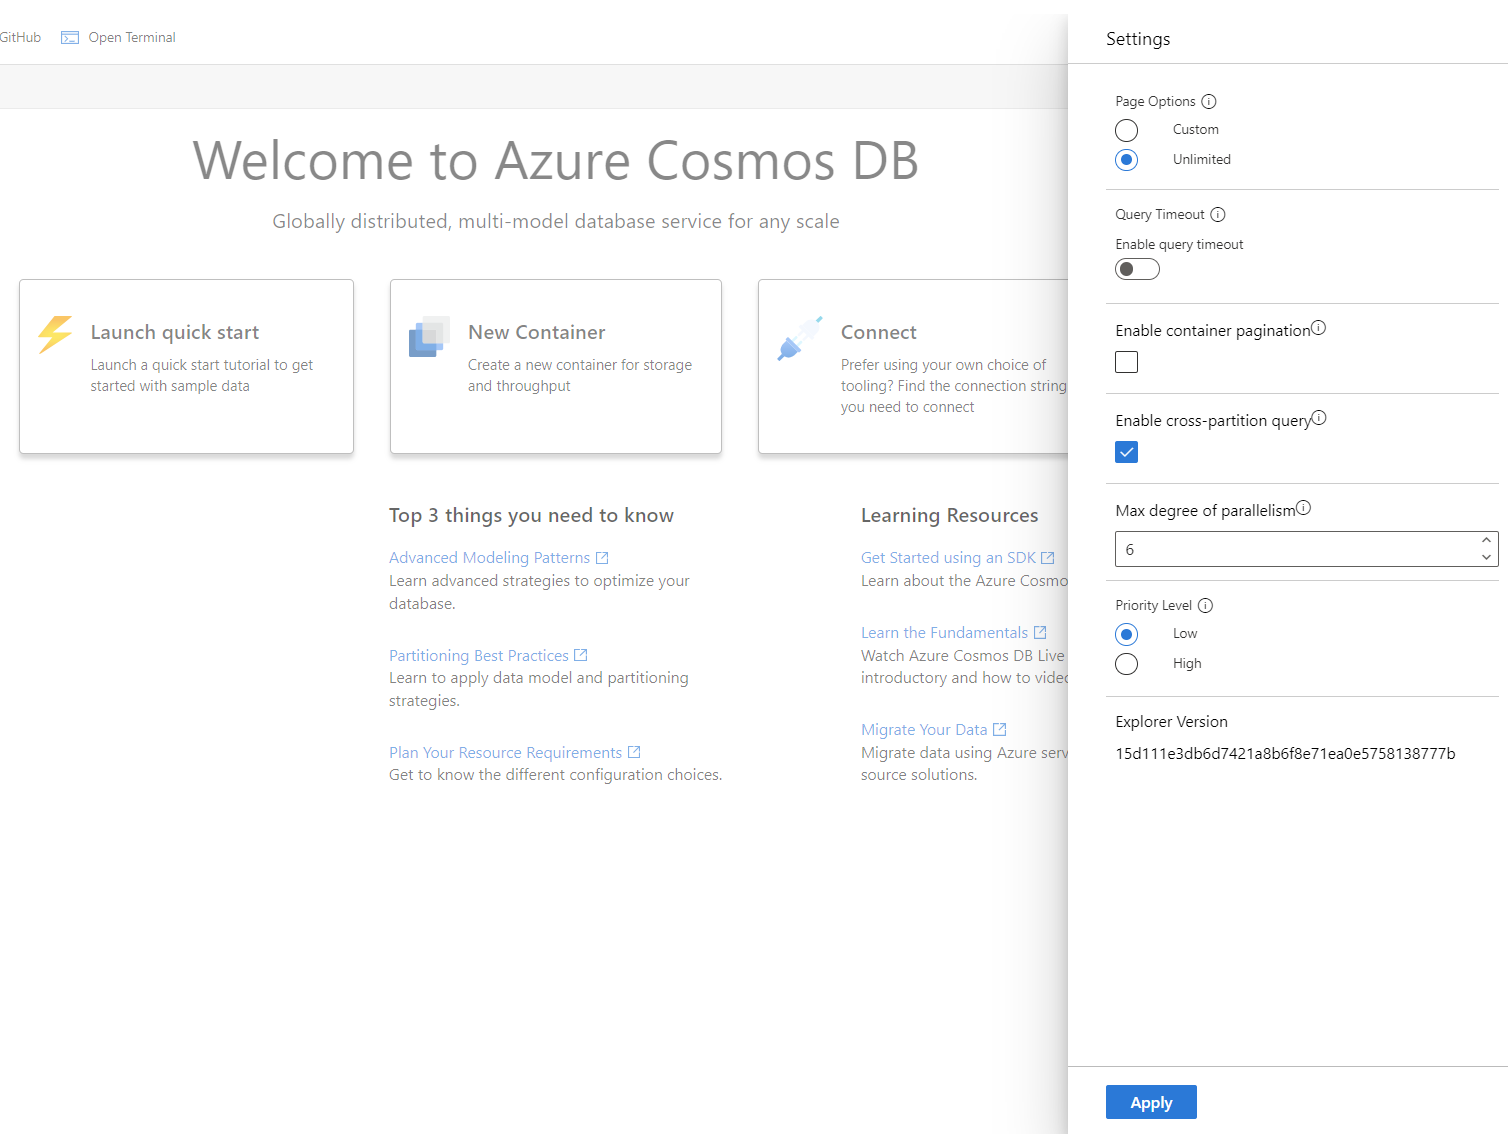 Screenshot of priority levels in Data explorer of an Azure Cosmos DB account.